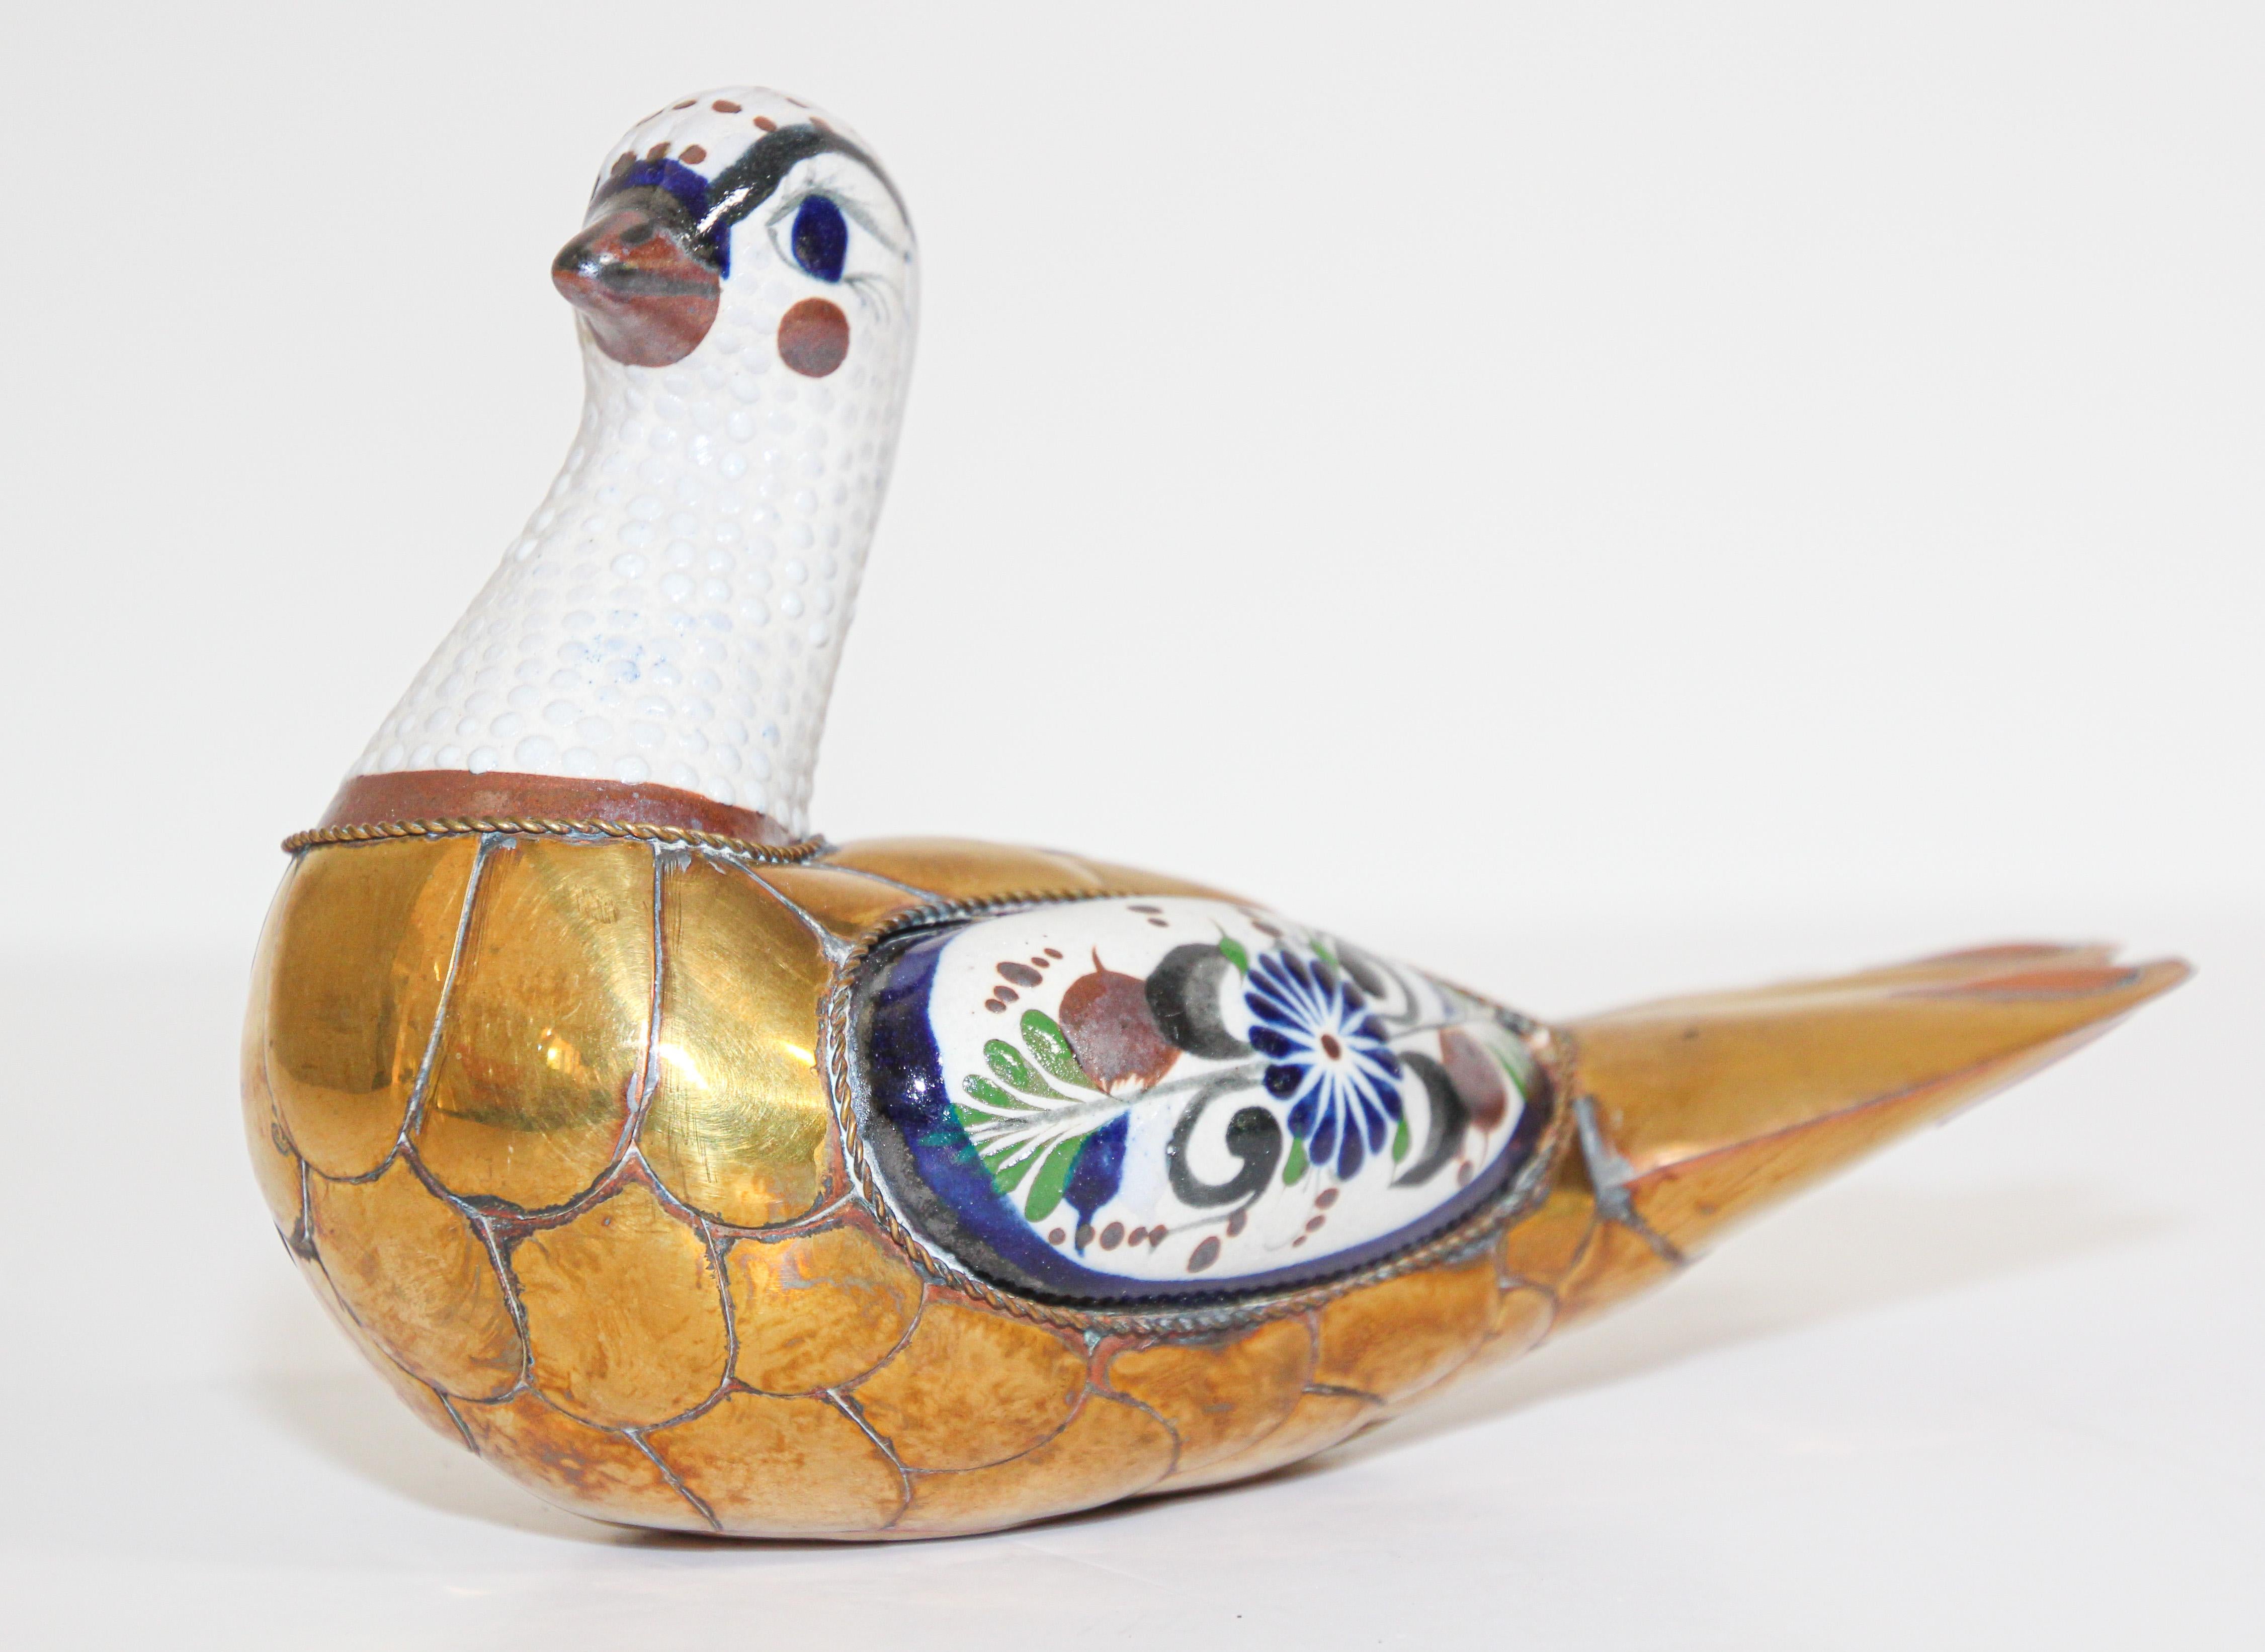 Vintage Mexican Tonala hand painted pottery bird Folk Art with brass decoration in the style of Sergio Bustamante.
Flora de la Cruz Acapulco Gro Mexico hand painted bird dove ceramic.
A beautiful piece of Tonala pottery encased in brass, Artistry